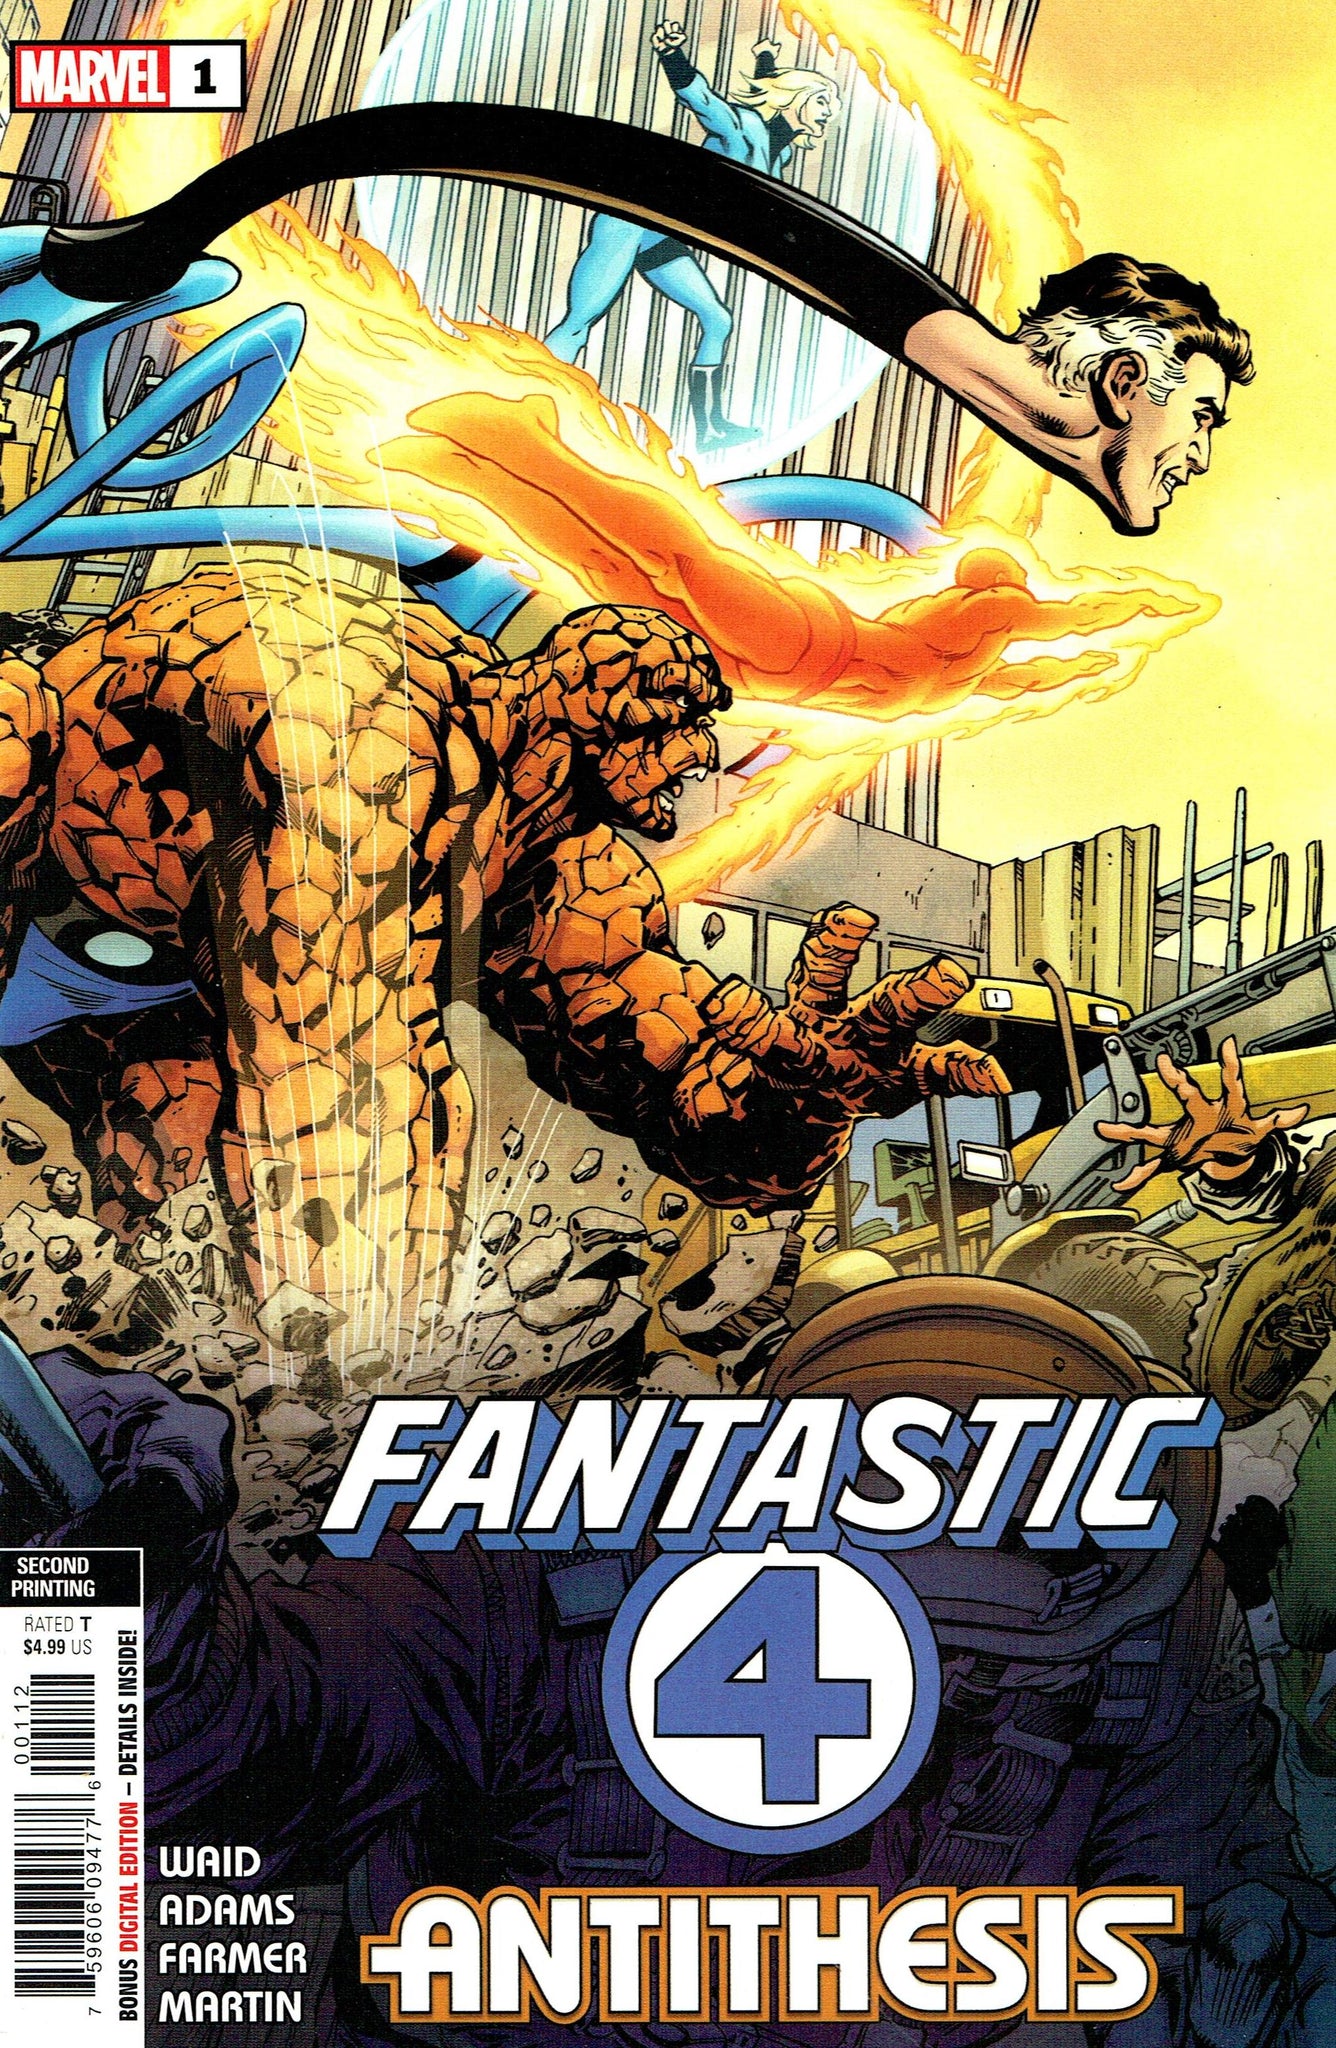 Fantastic Four: Antithesis (2020) #1 (of 4) 2nd Print